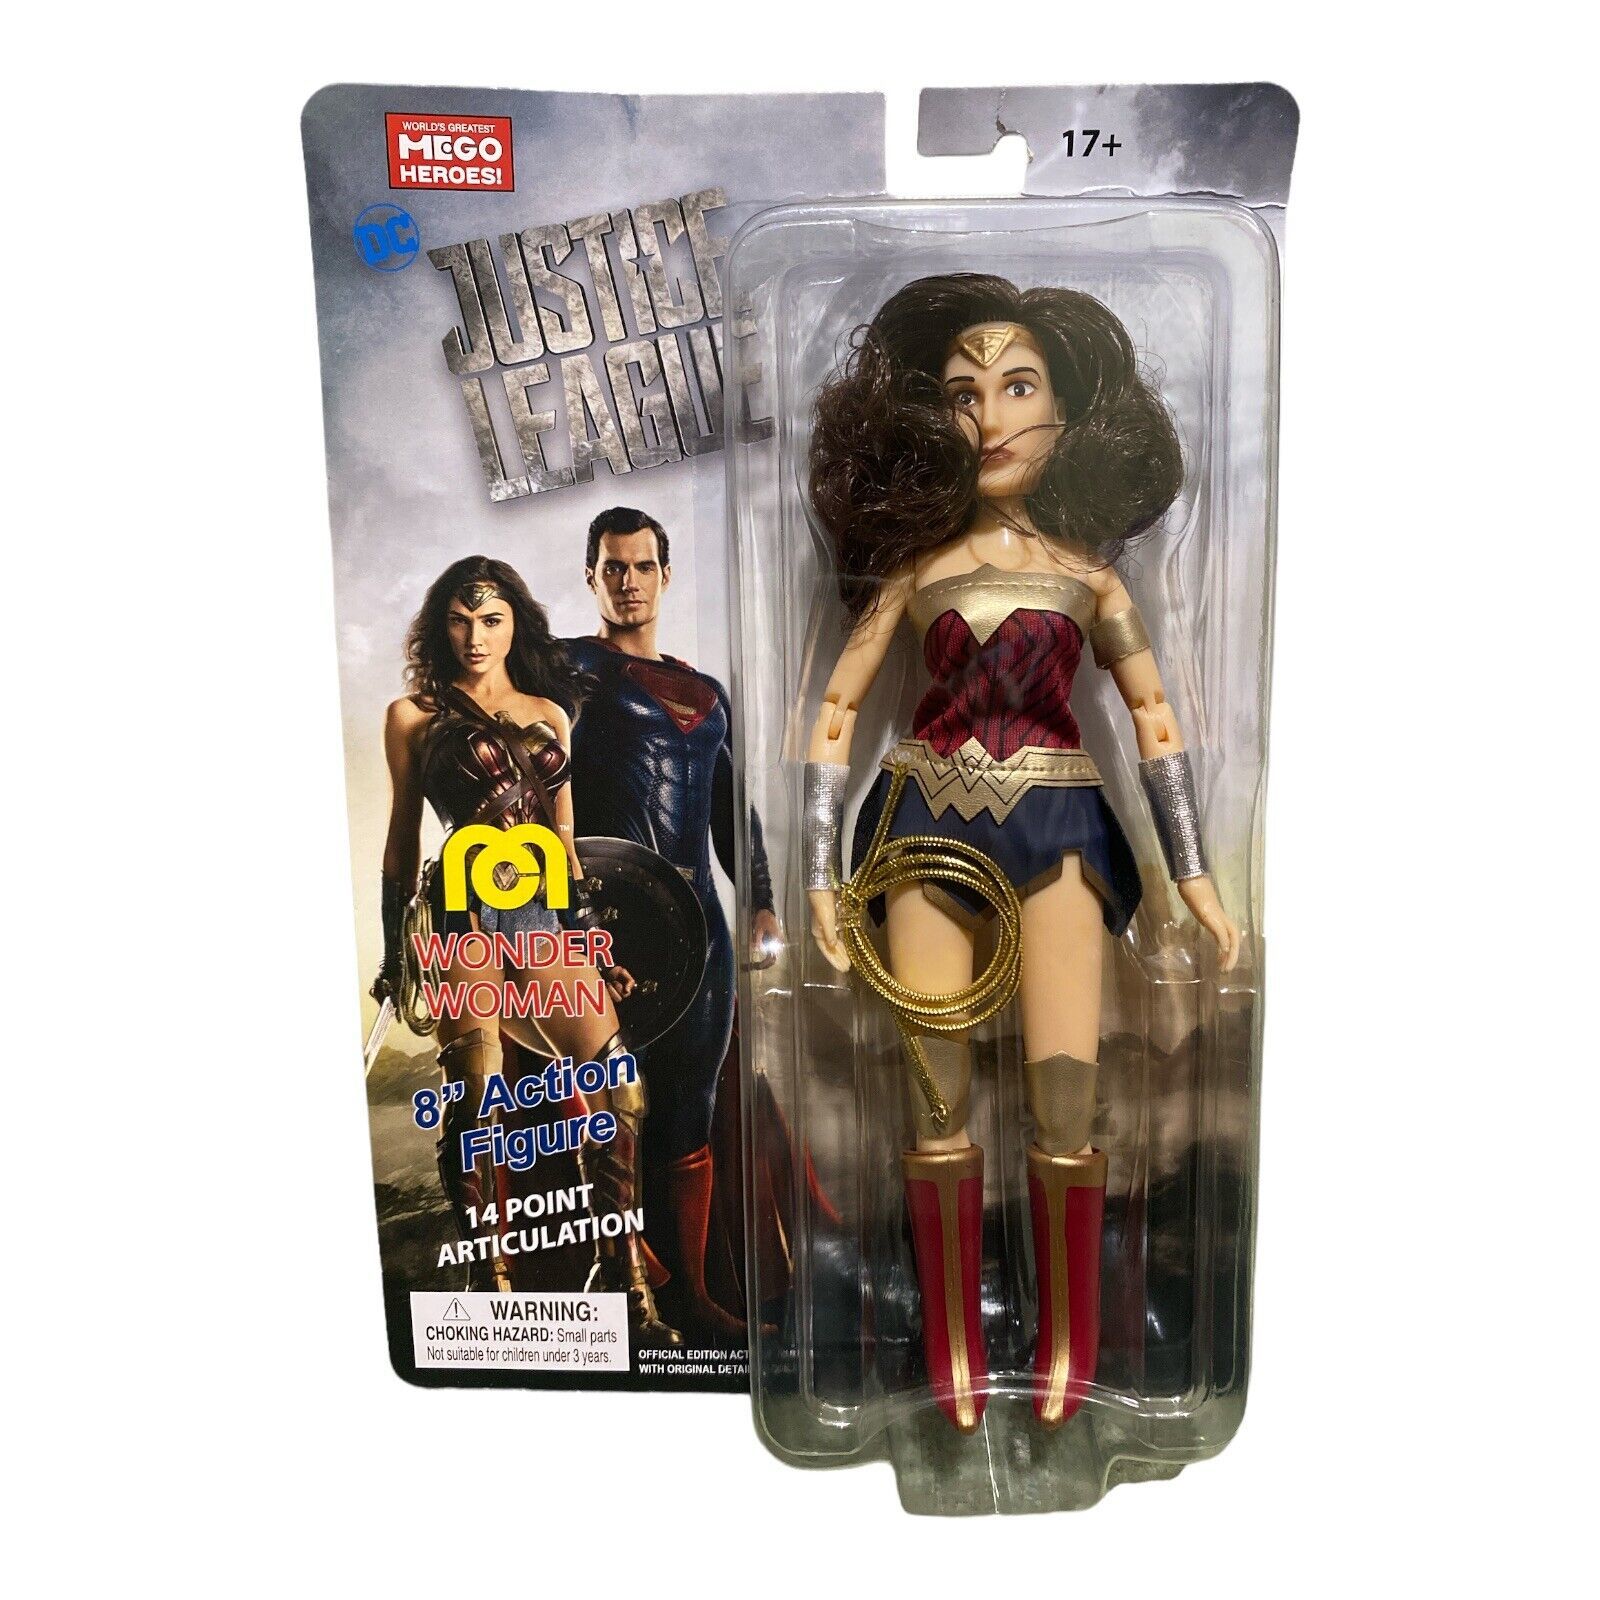 Primary image for Mego Heroes DC Justice League Wonder Woman 8" Action Figure *New